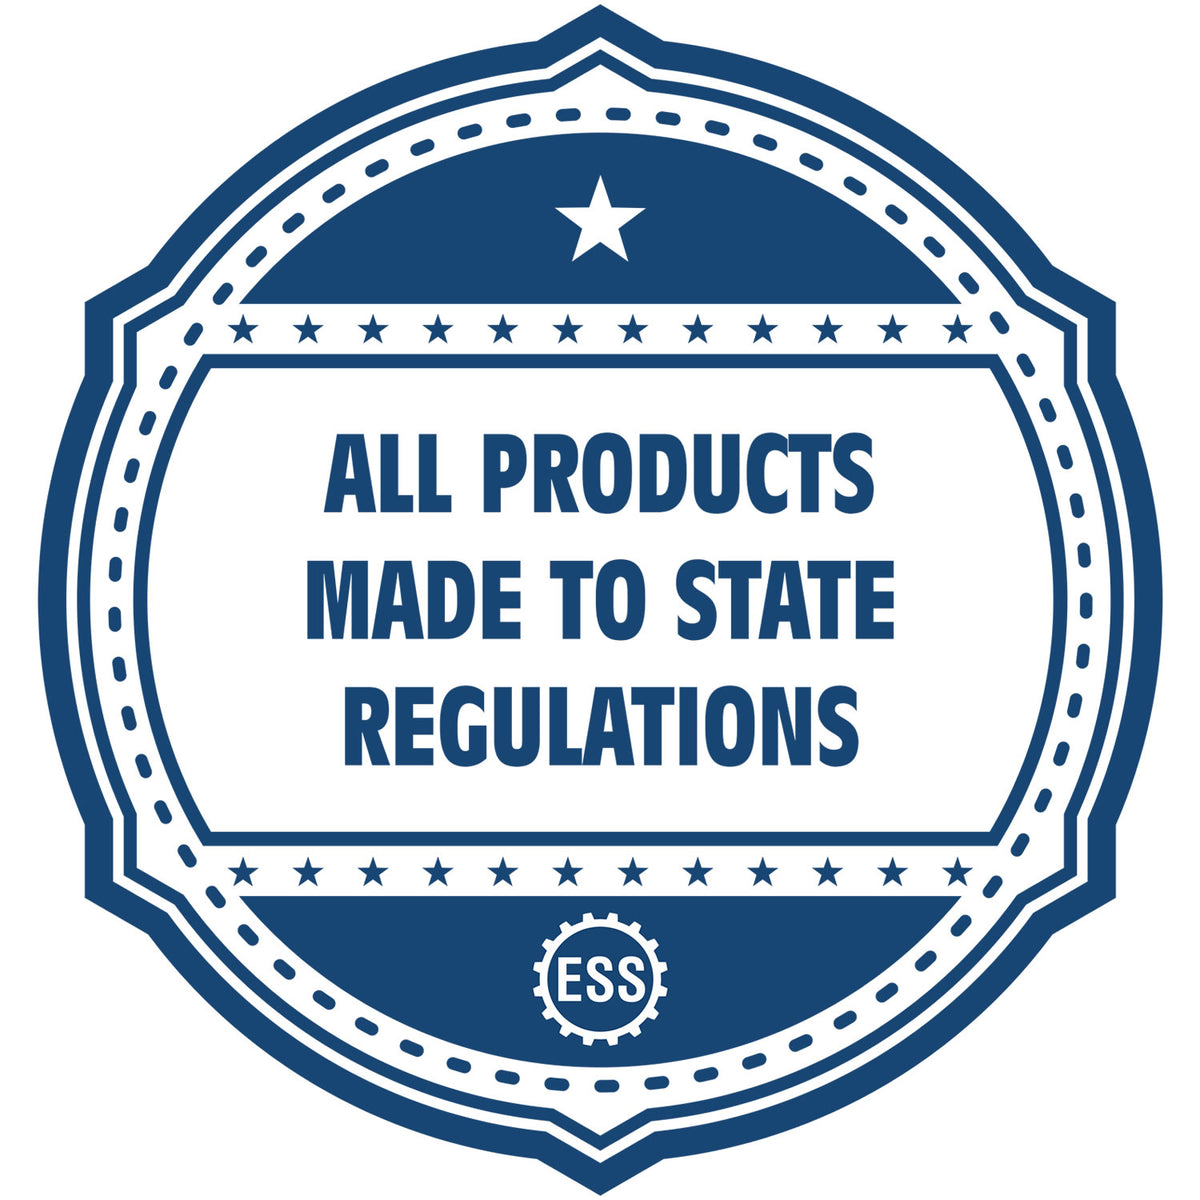 An icon or badge element for the Slim Pre-Inked Tennessee Land Surveyor Seal Stamp showing that this product is made in compliance with state regulations.